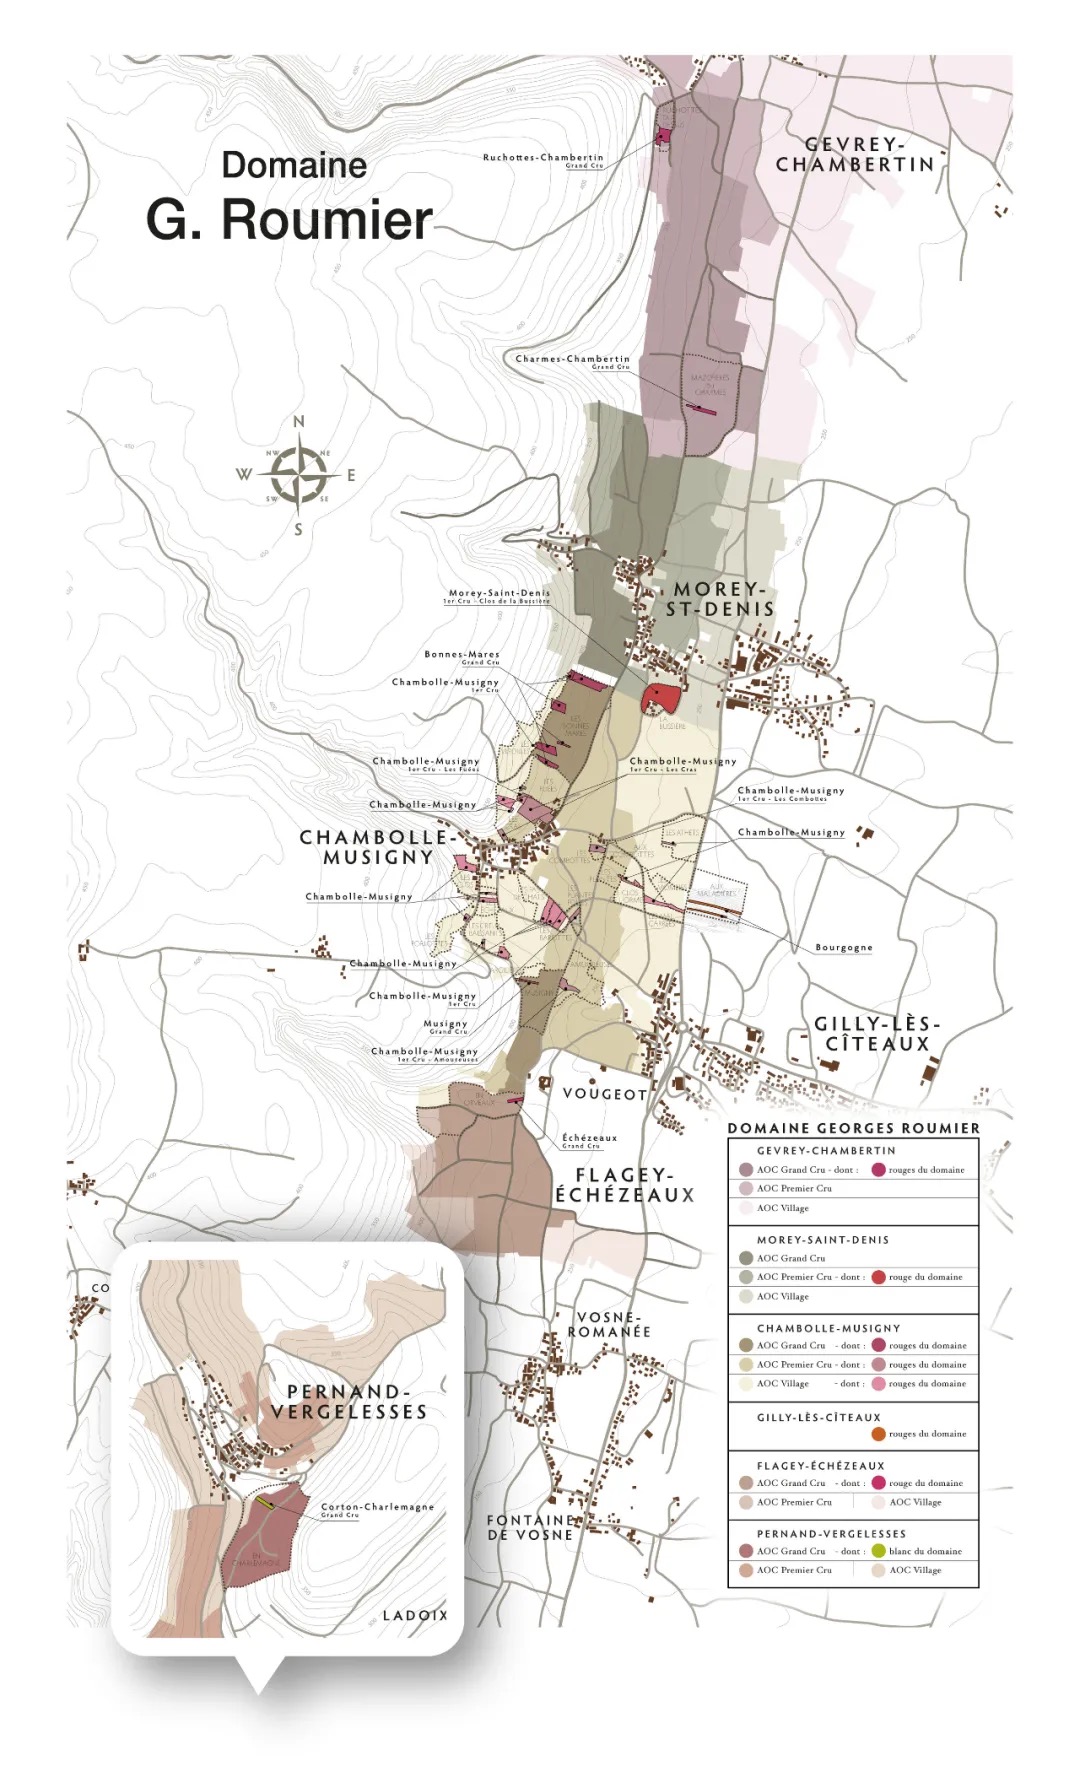 The-terroir-of-Domaine-Georges-Roumier-1-1-2-1-1-1